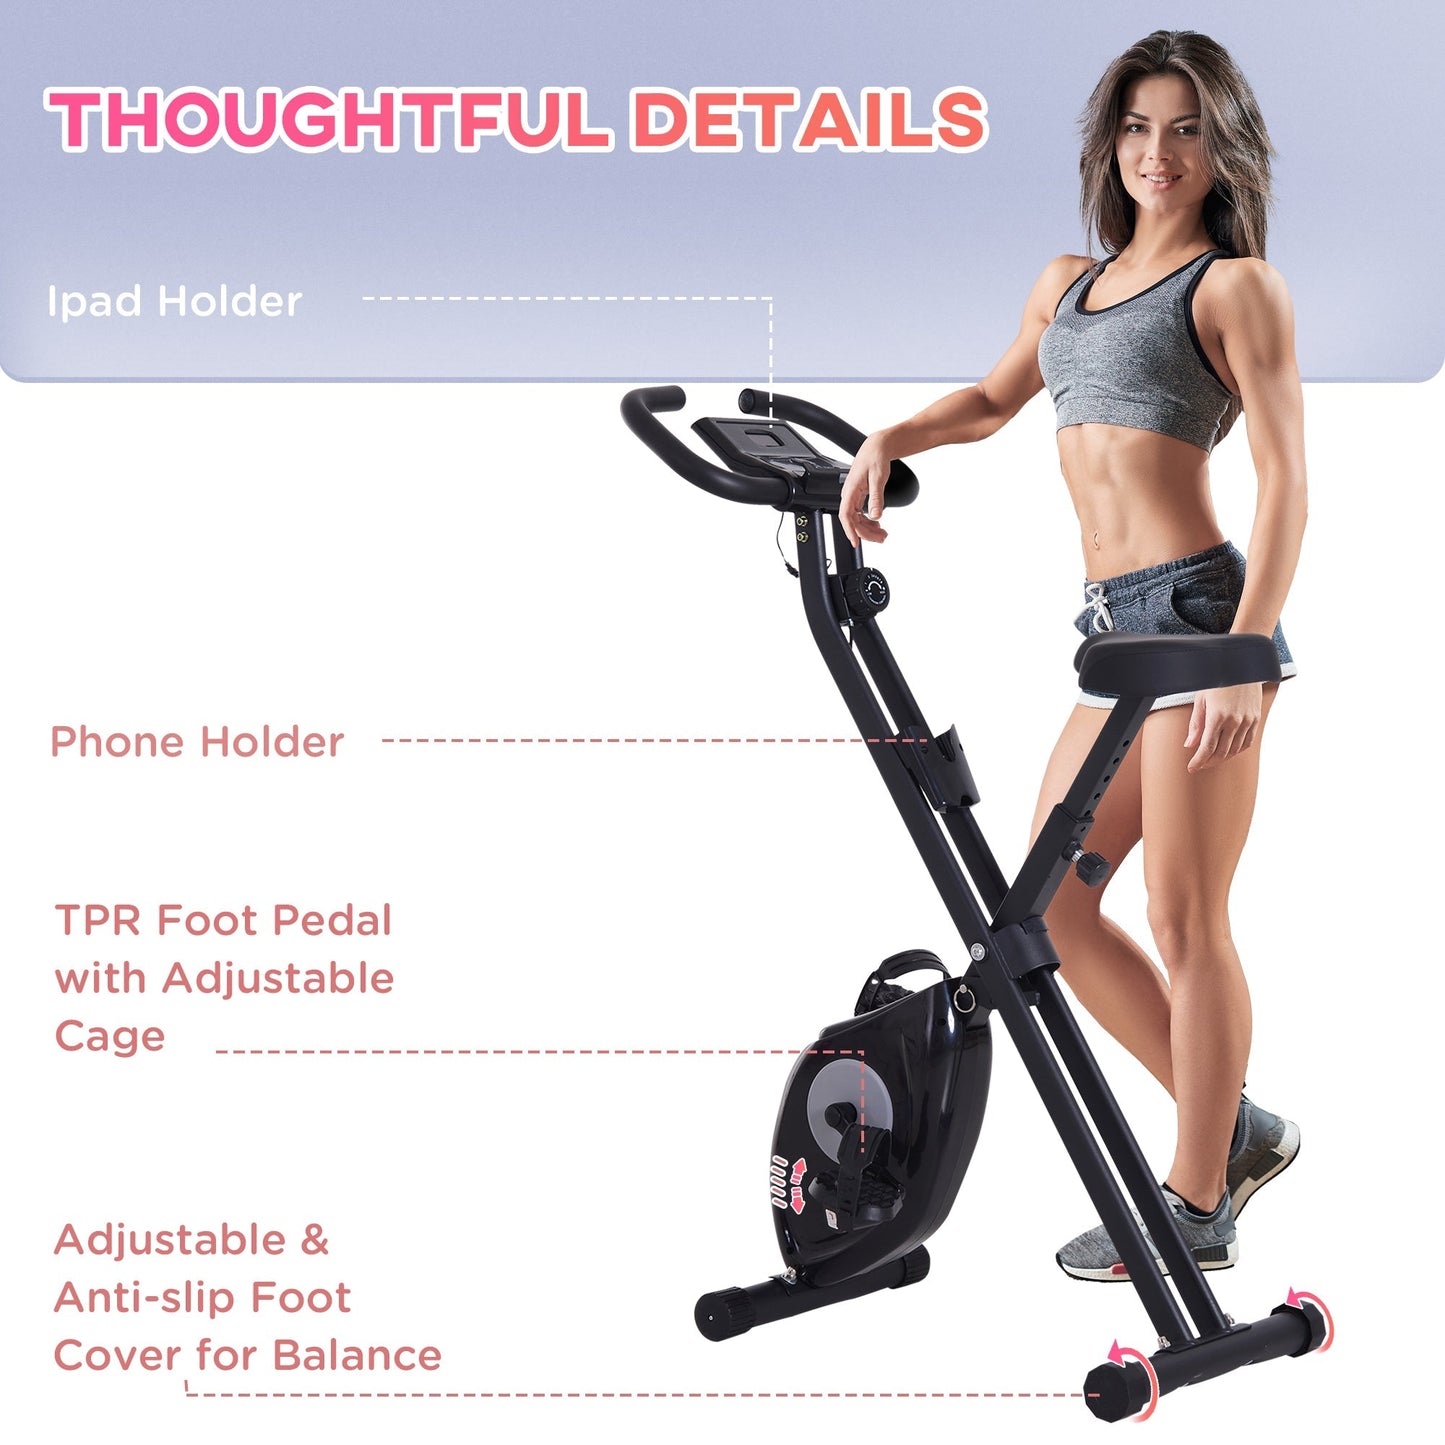 Foldable Exercise Bike with 8-Level Adjustable Magnetic Resistance, Indoor Stationary Bike X Bike with LCD Screen, Tablet Phone Holder for Home Aerobic Training, Black at Gallery Canada